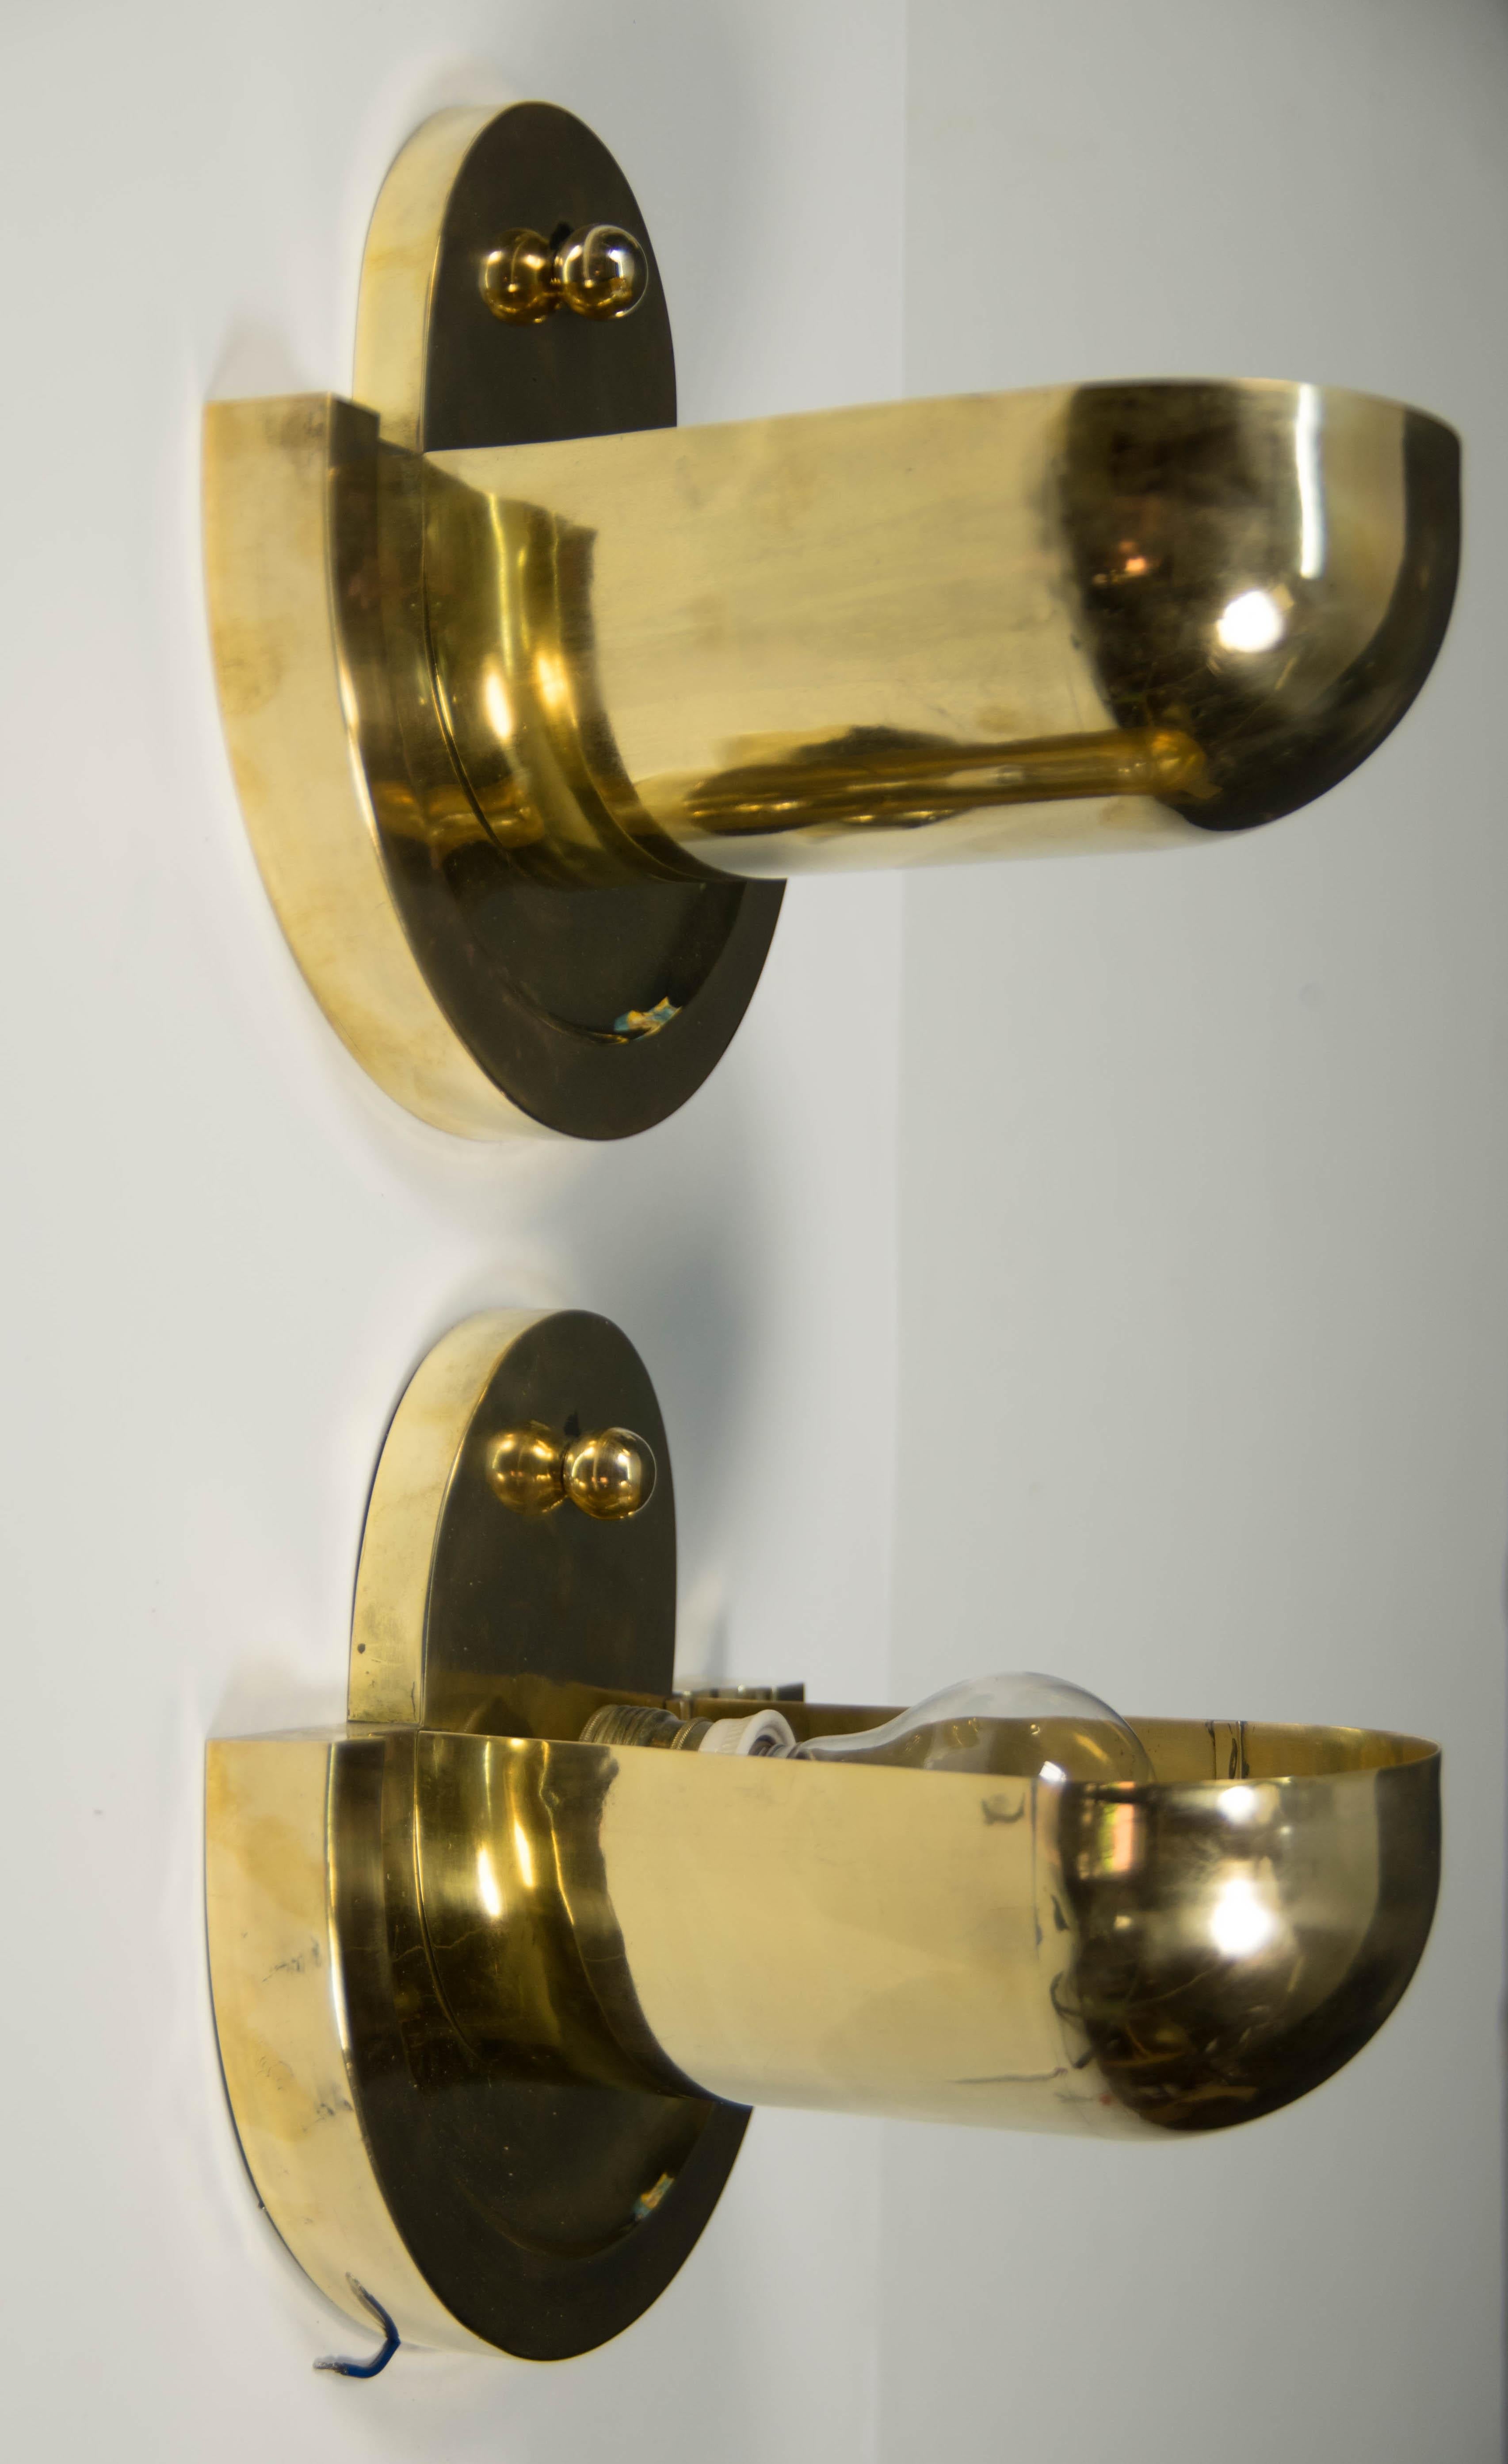 Very rare brass wall lamps come from house in cubistic style. Beautiful clean and simple rondocubist lines. Attributed to Josef Gocár, Polished, rewired. Original brass and ceramic sockets: E25-E27. US wiring compatible.